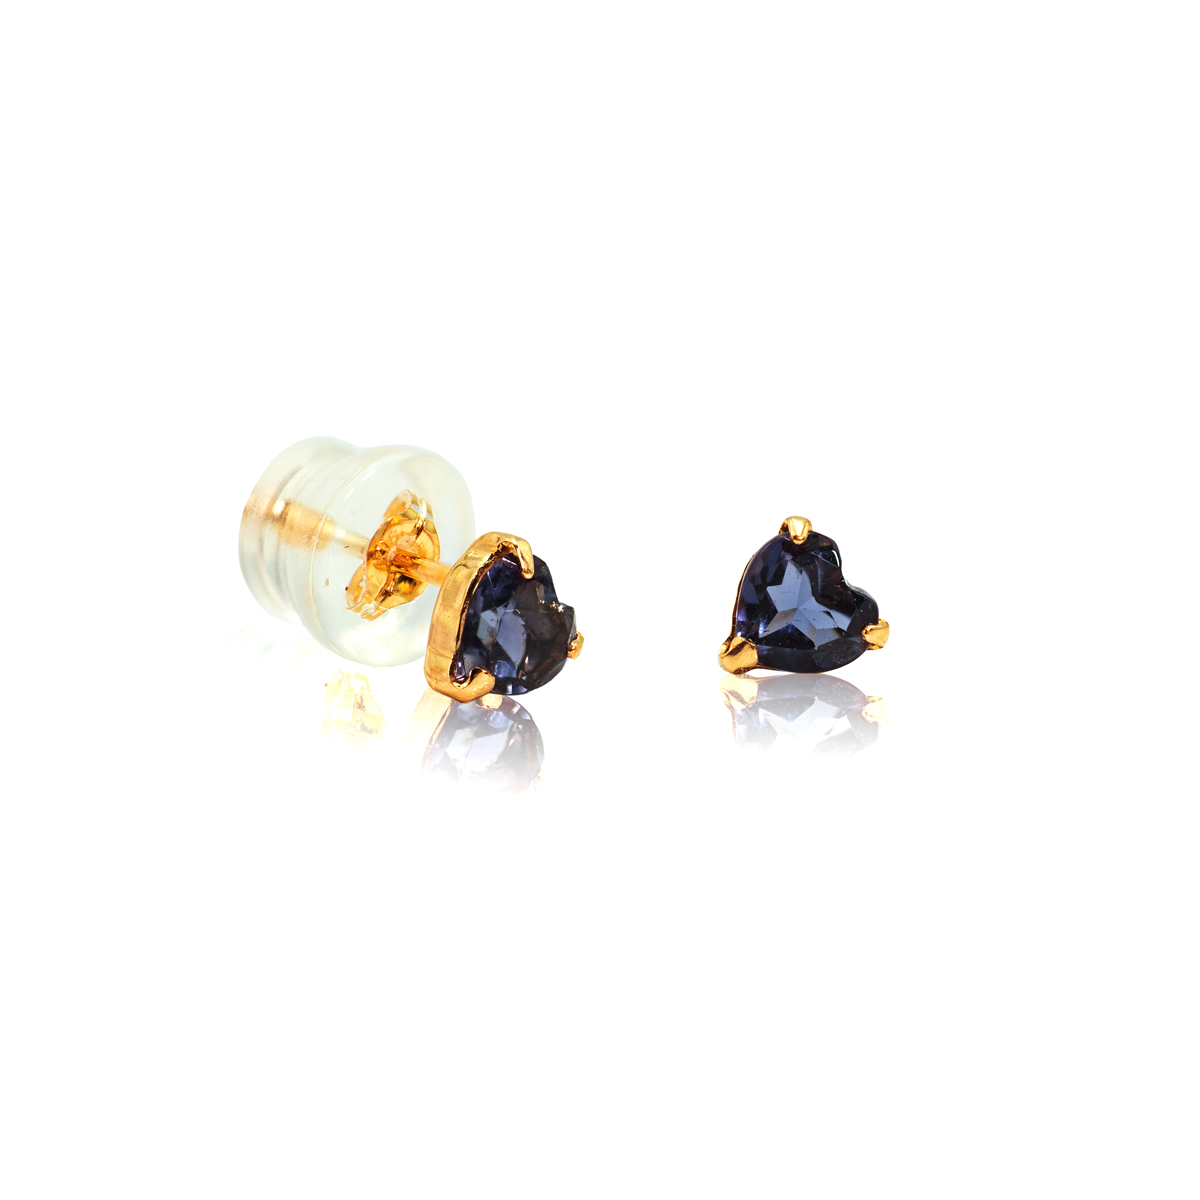 Heart Shaped Stud Earrings in 18k Yellow Gold with Iolite